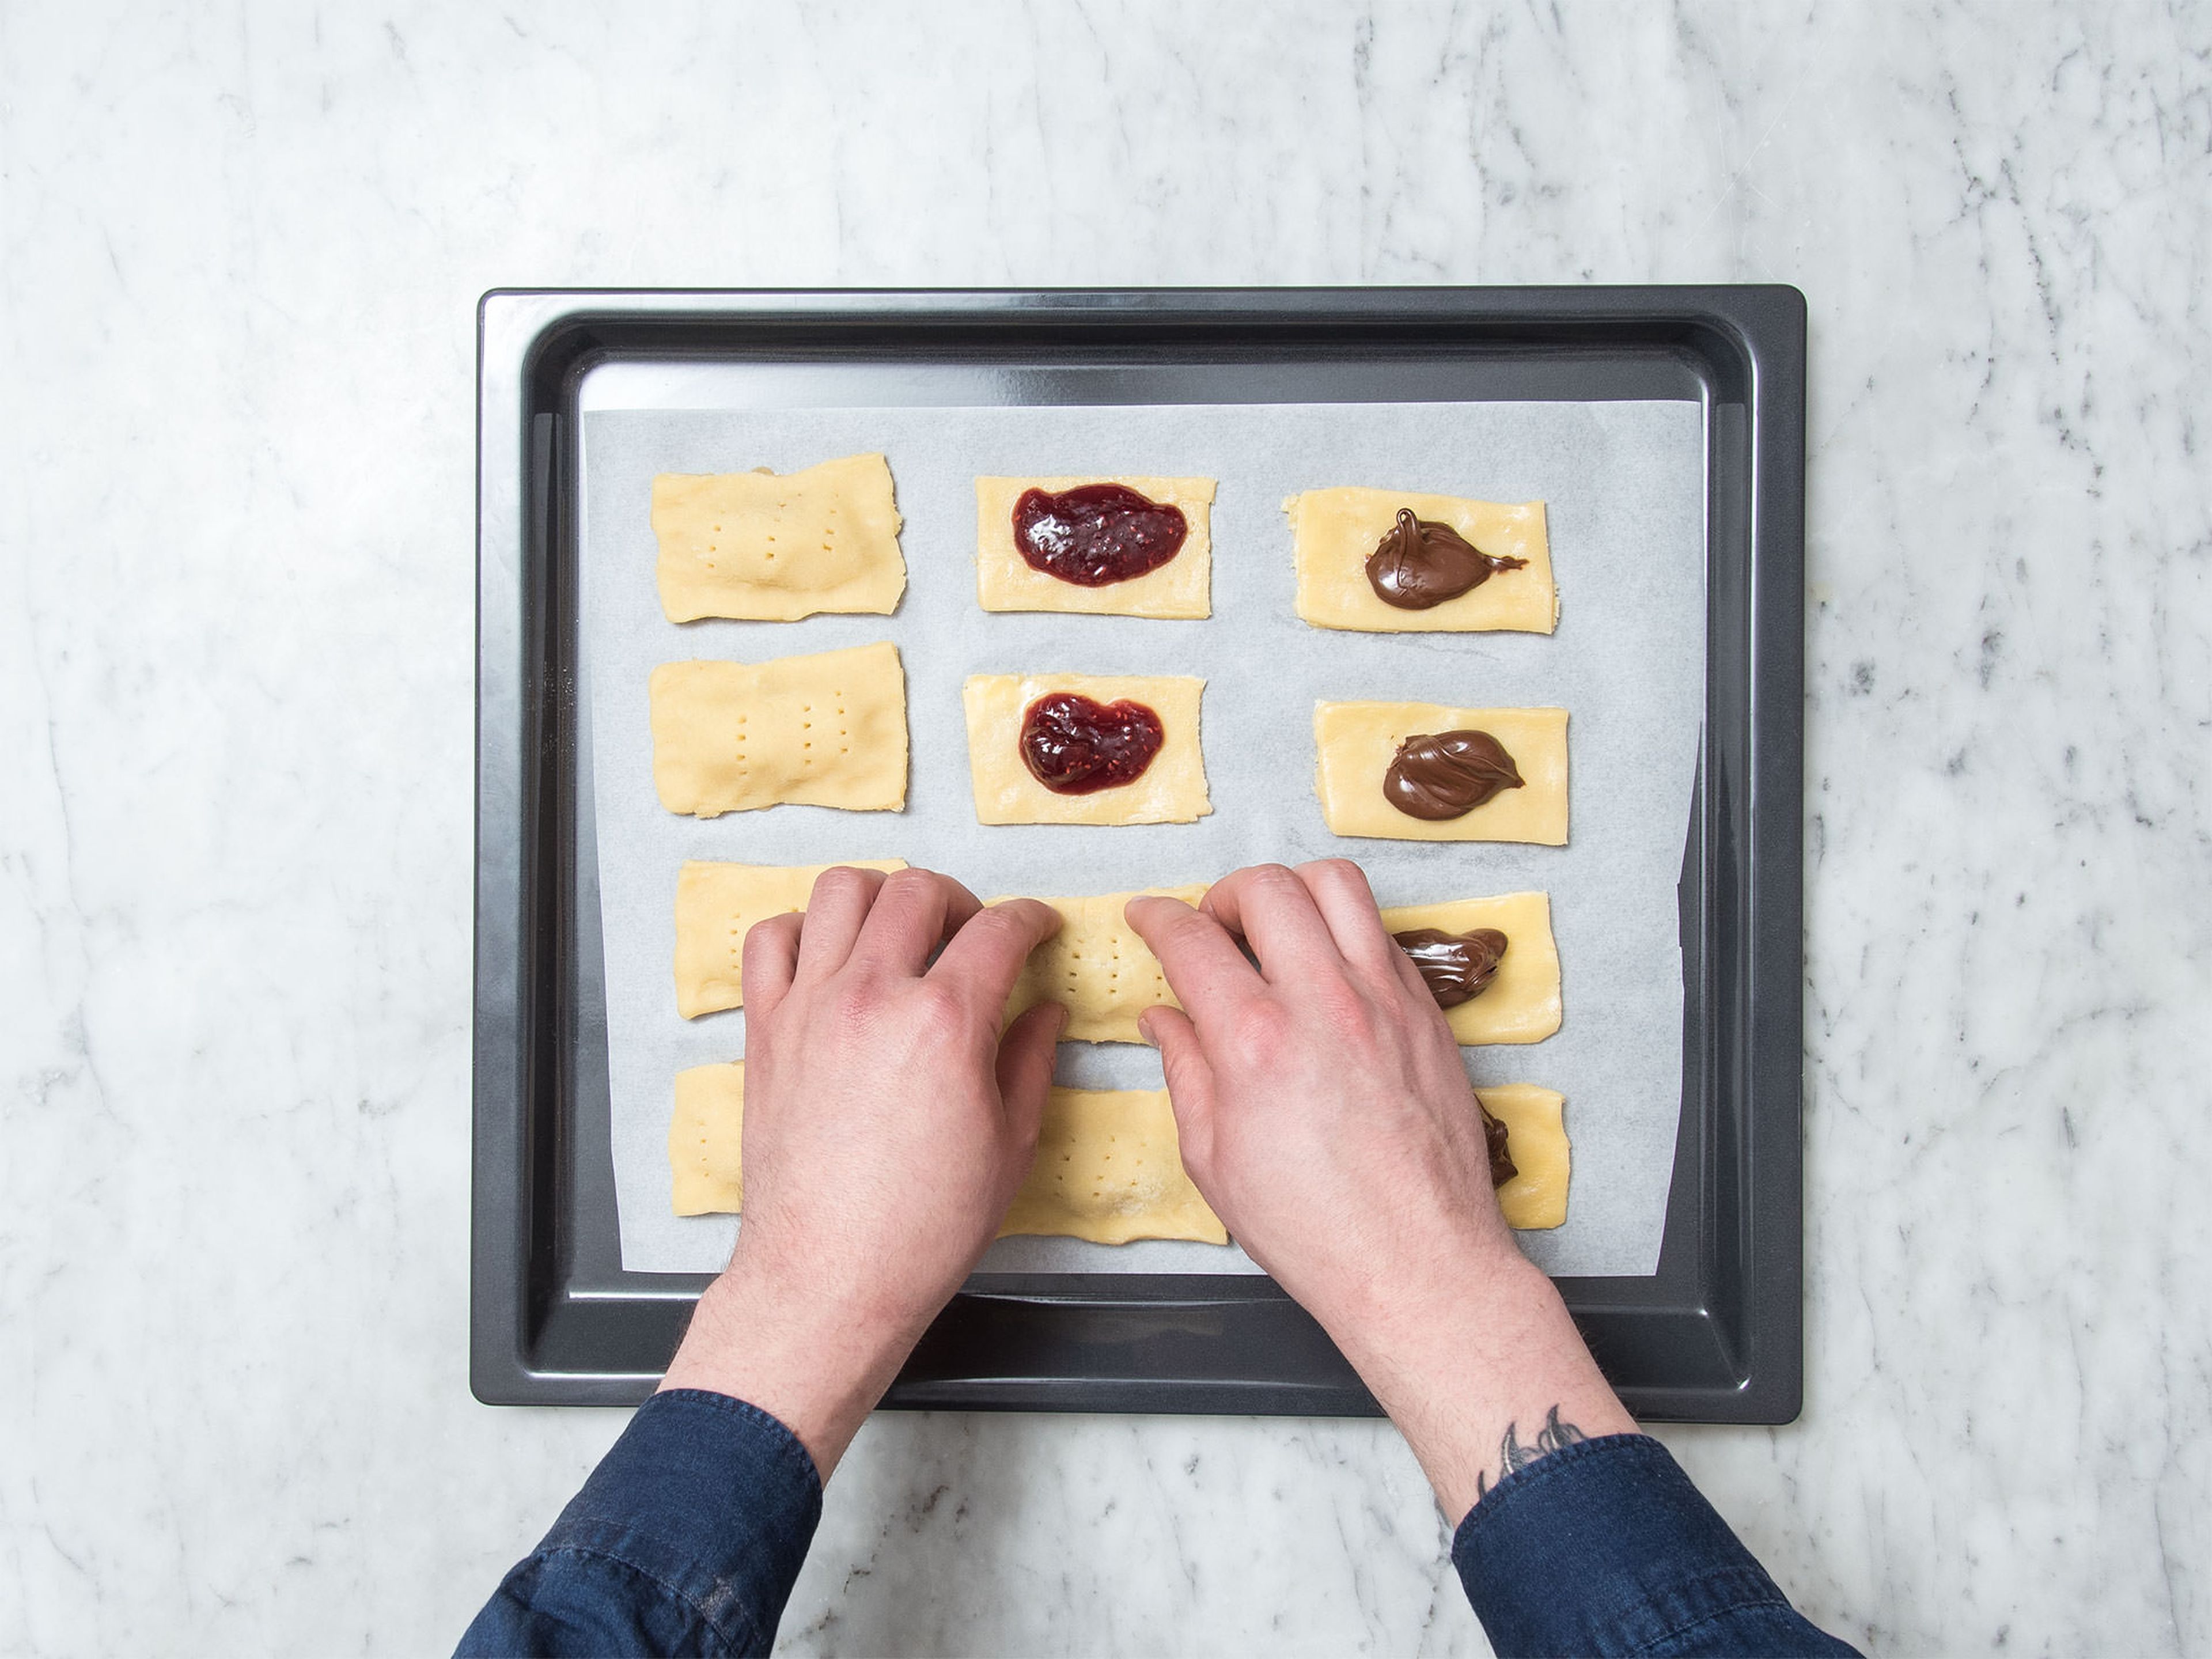 Use a fork to poke holes in the remaining half of the dough, then transfer them onto the filled dough rectangles on the baking sheet. Use your fingertips to press around the filling, then use a fork to seal the edges so the filling will stay inside. Preheat oven to 175°C/350°F and refrigerate pop tarts for approx. 20 min. Afterwards, bake them for approx. 20 min. until golden brown. Let cool.